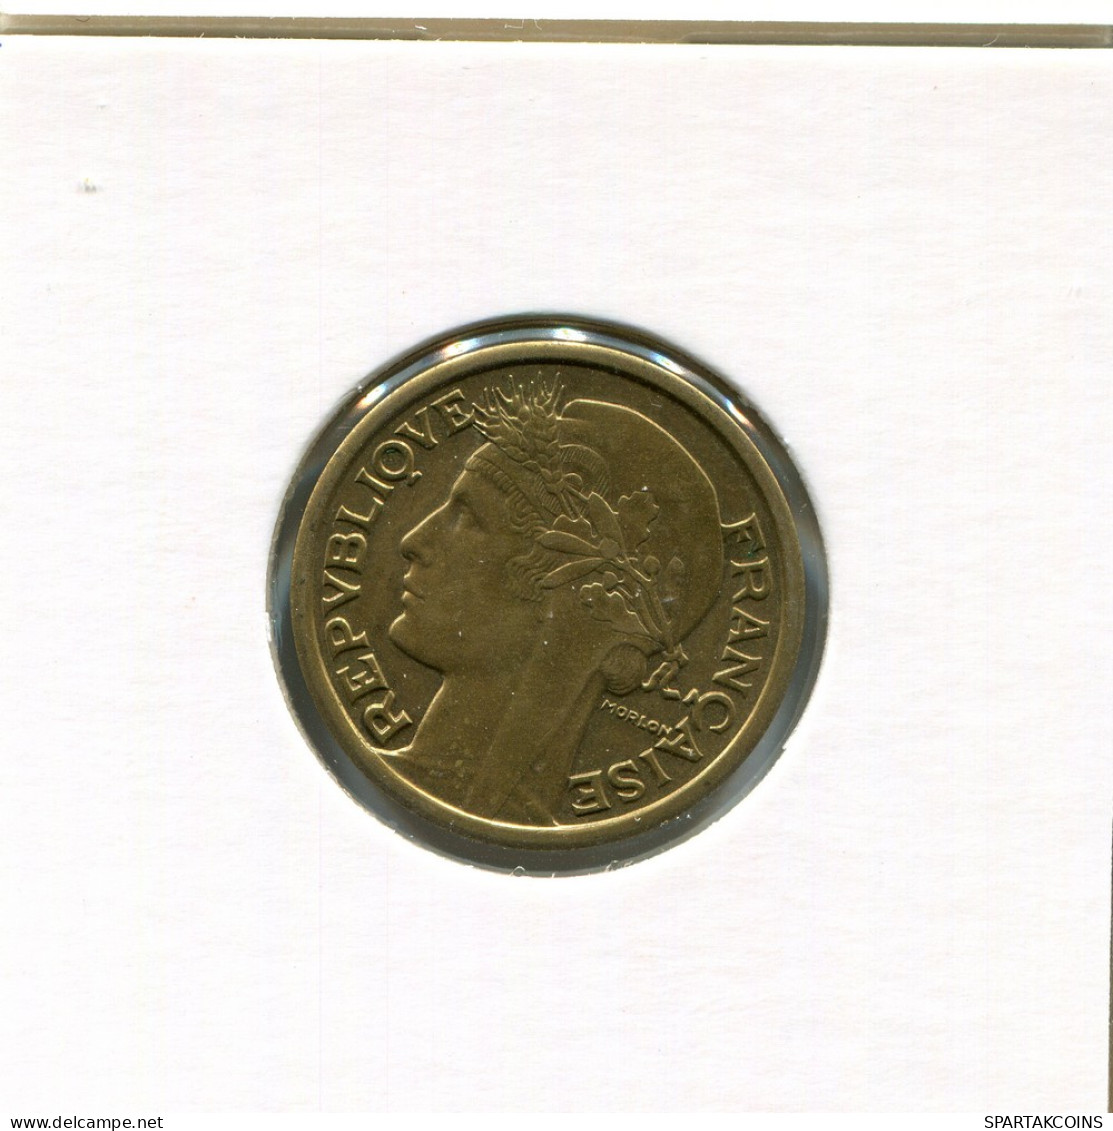 1 FRANC 1940 FRANCE Coin French Coin #AM279 - 1 Franc